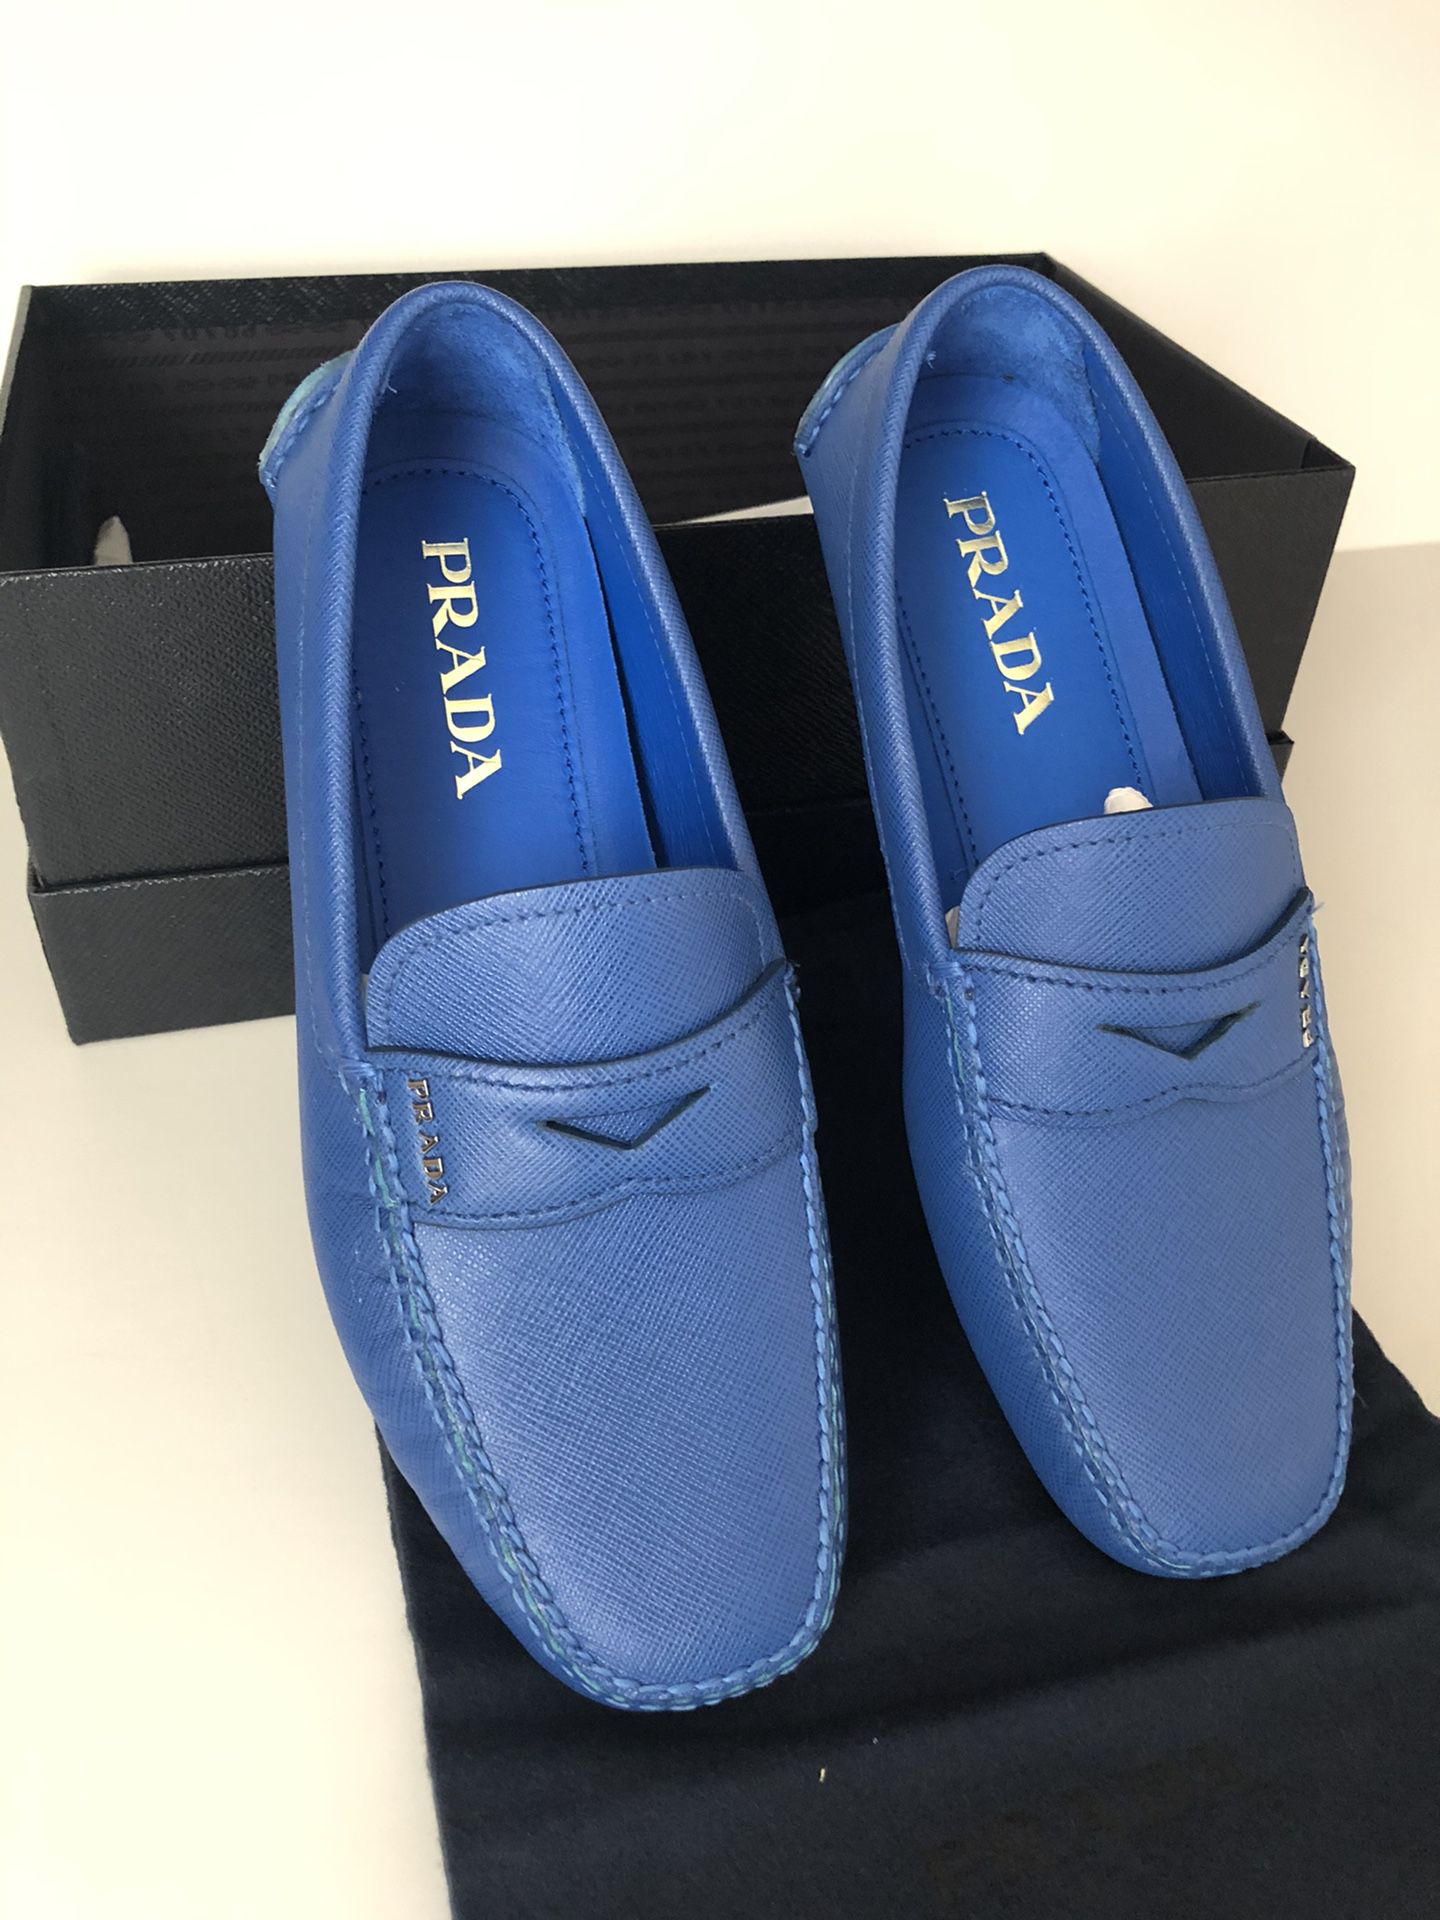 Prada men’s shoes, size 5 1/2, authentic made in Italy, new with box